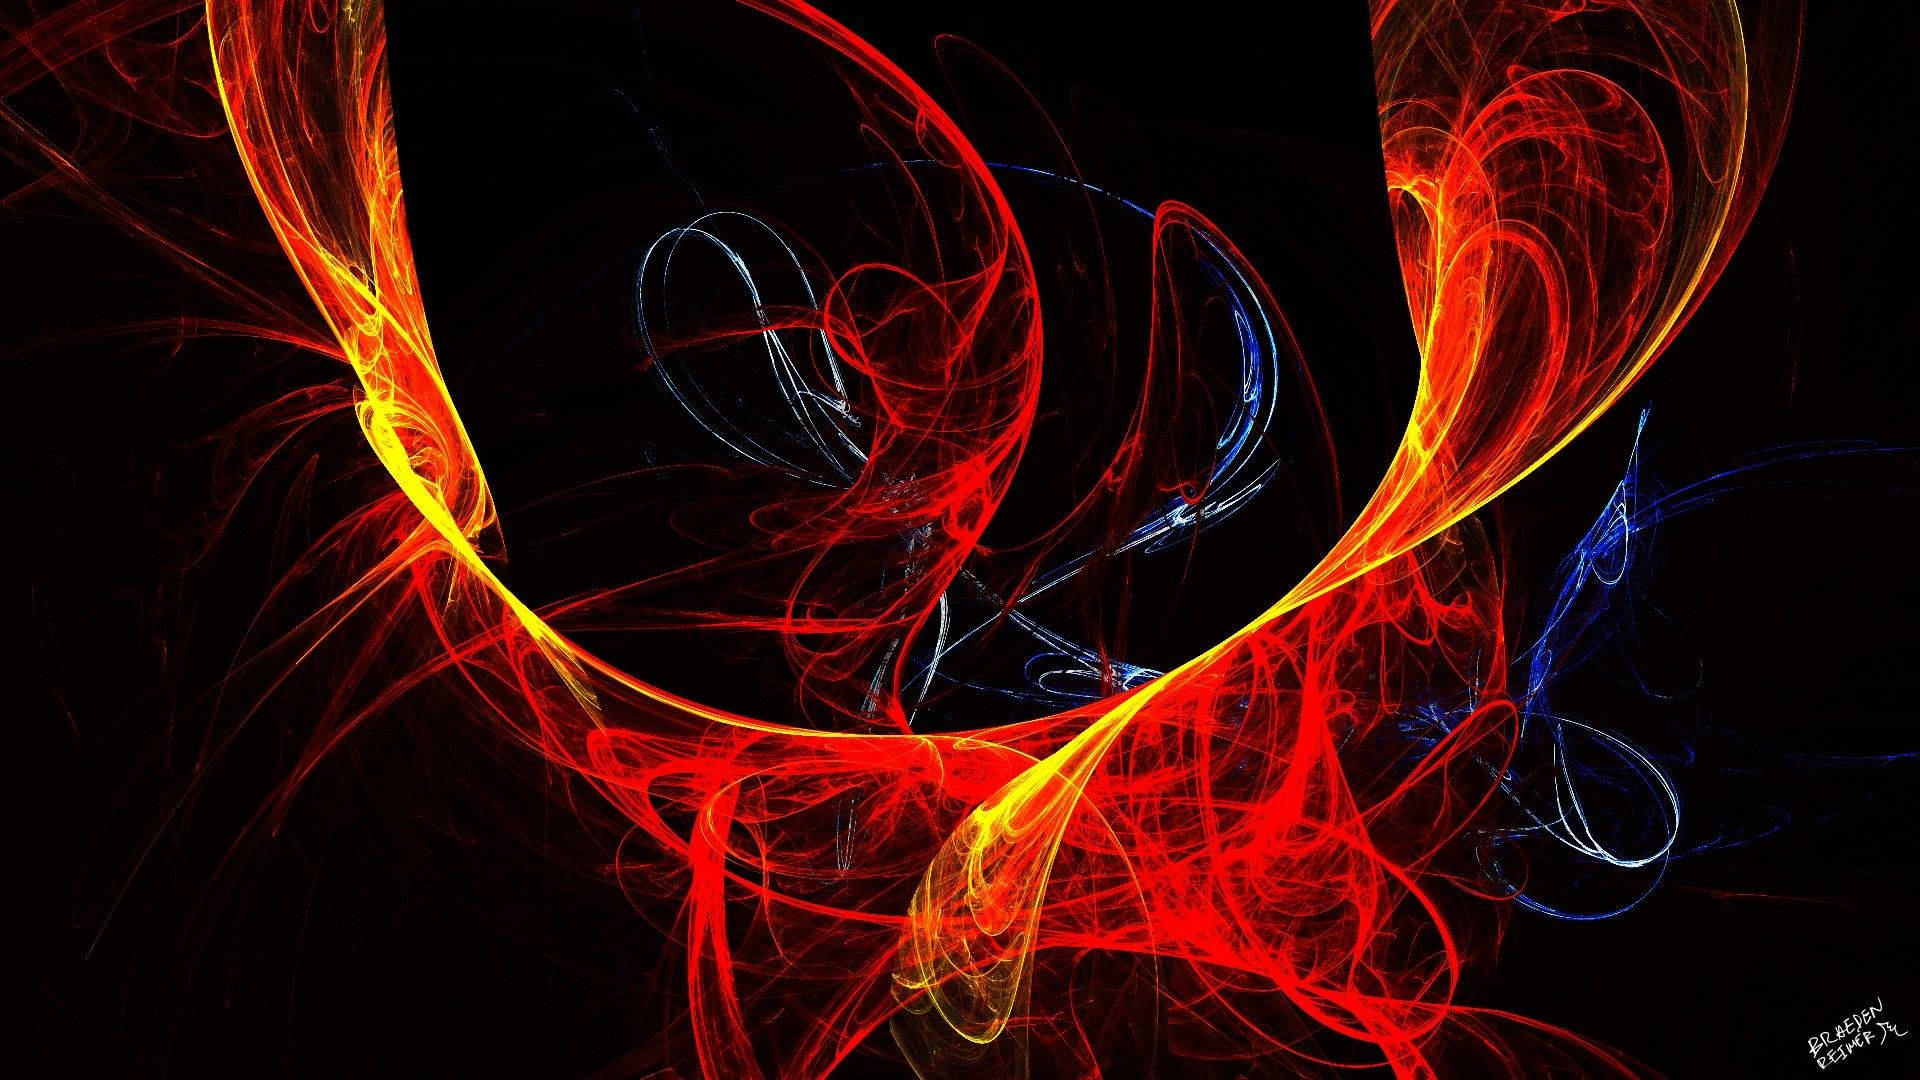 Neon Red 1920X1080 Wallpaper and Background Image